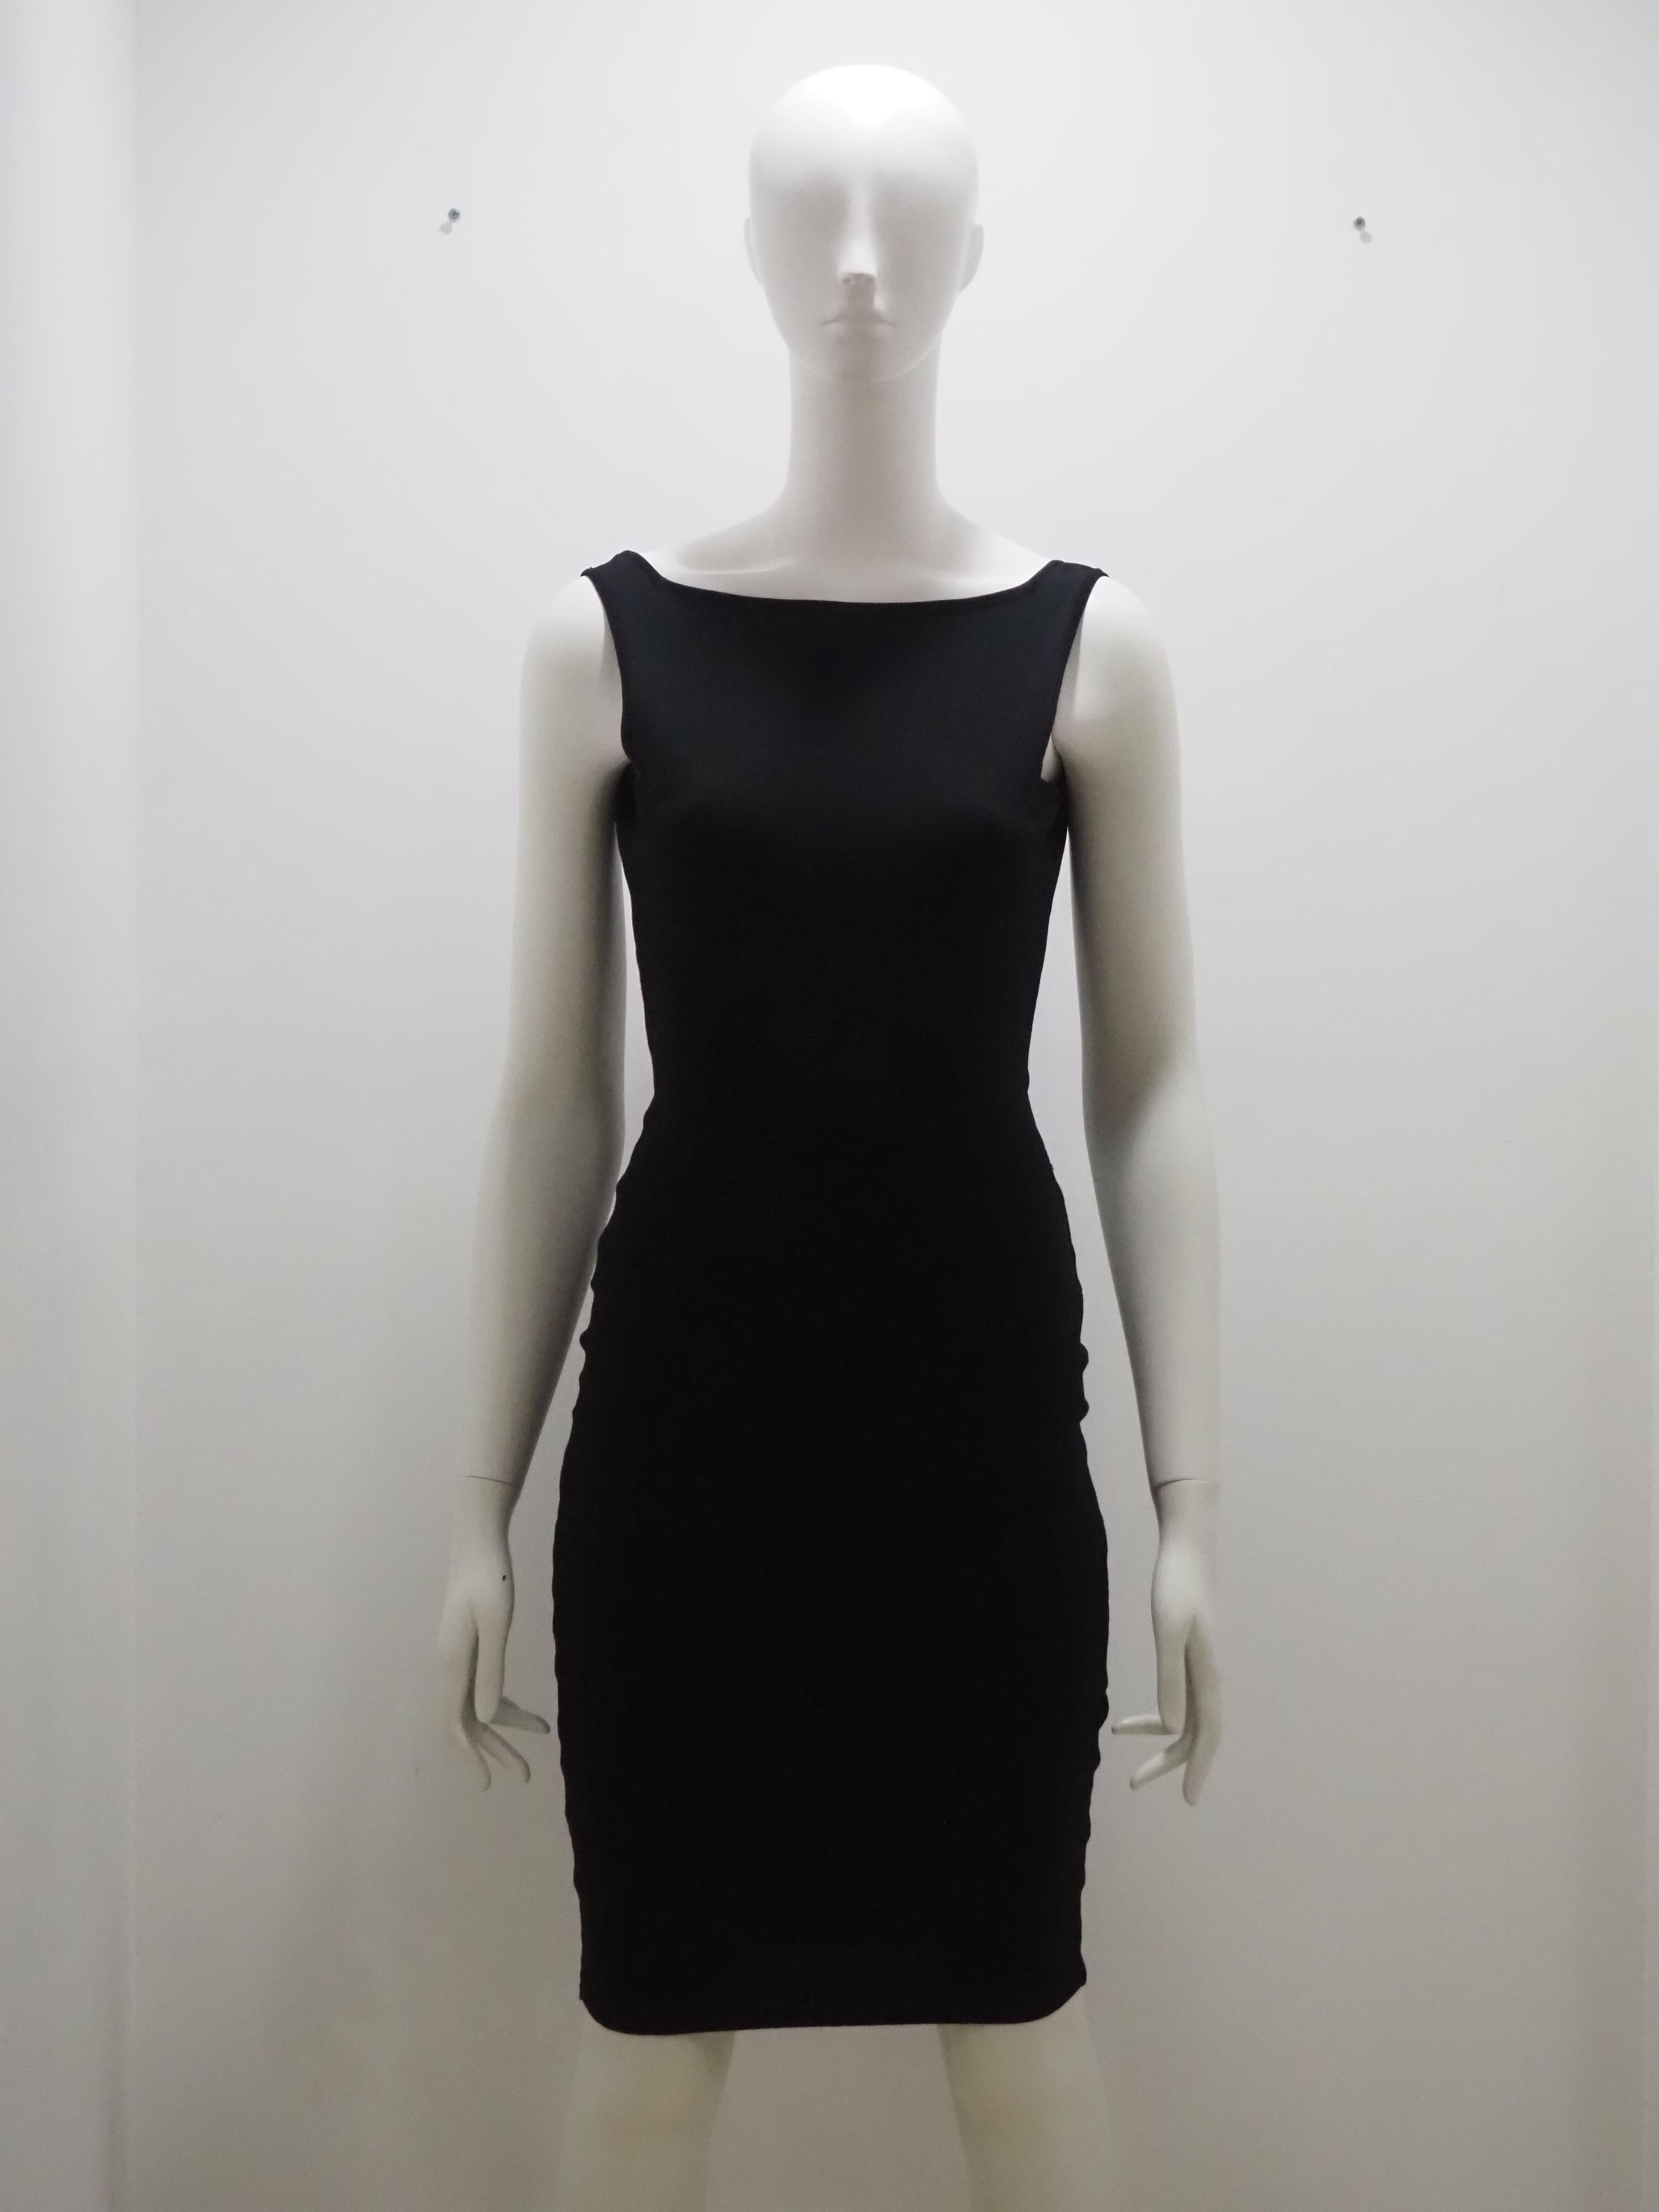 Gucci black dress
totally made in italy in size 42